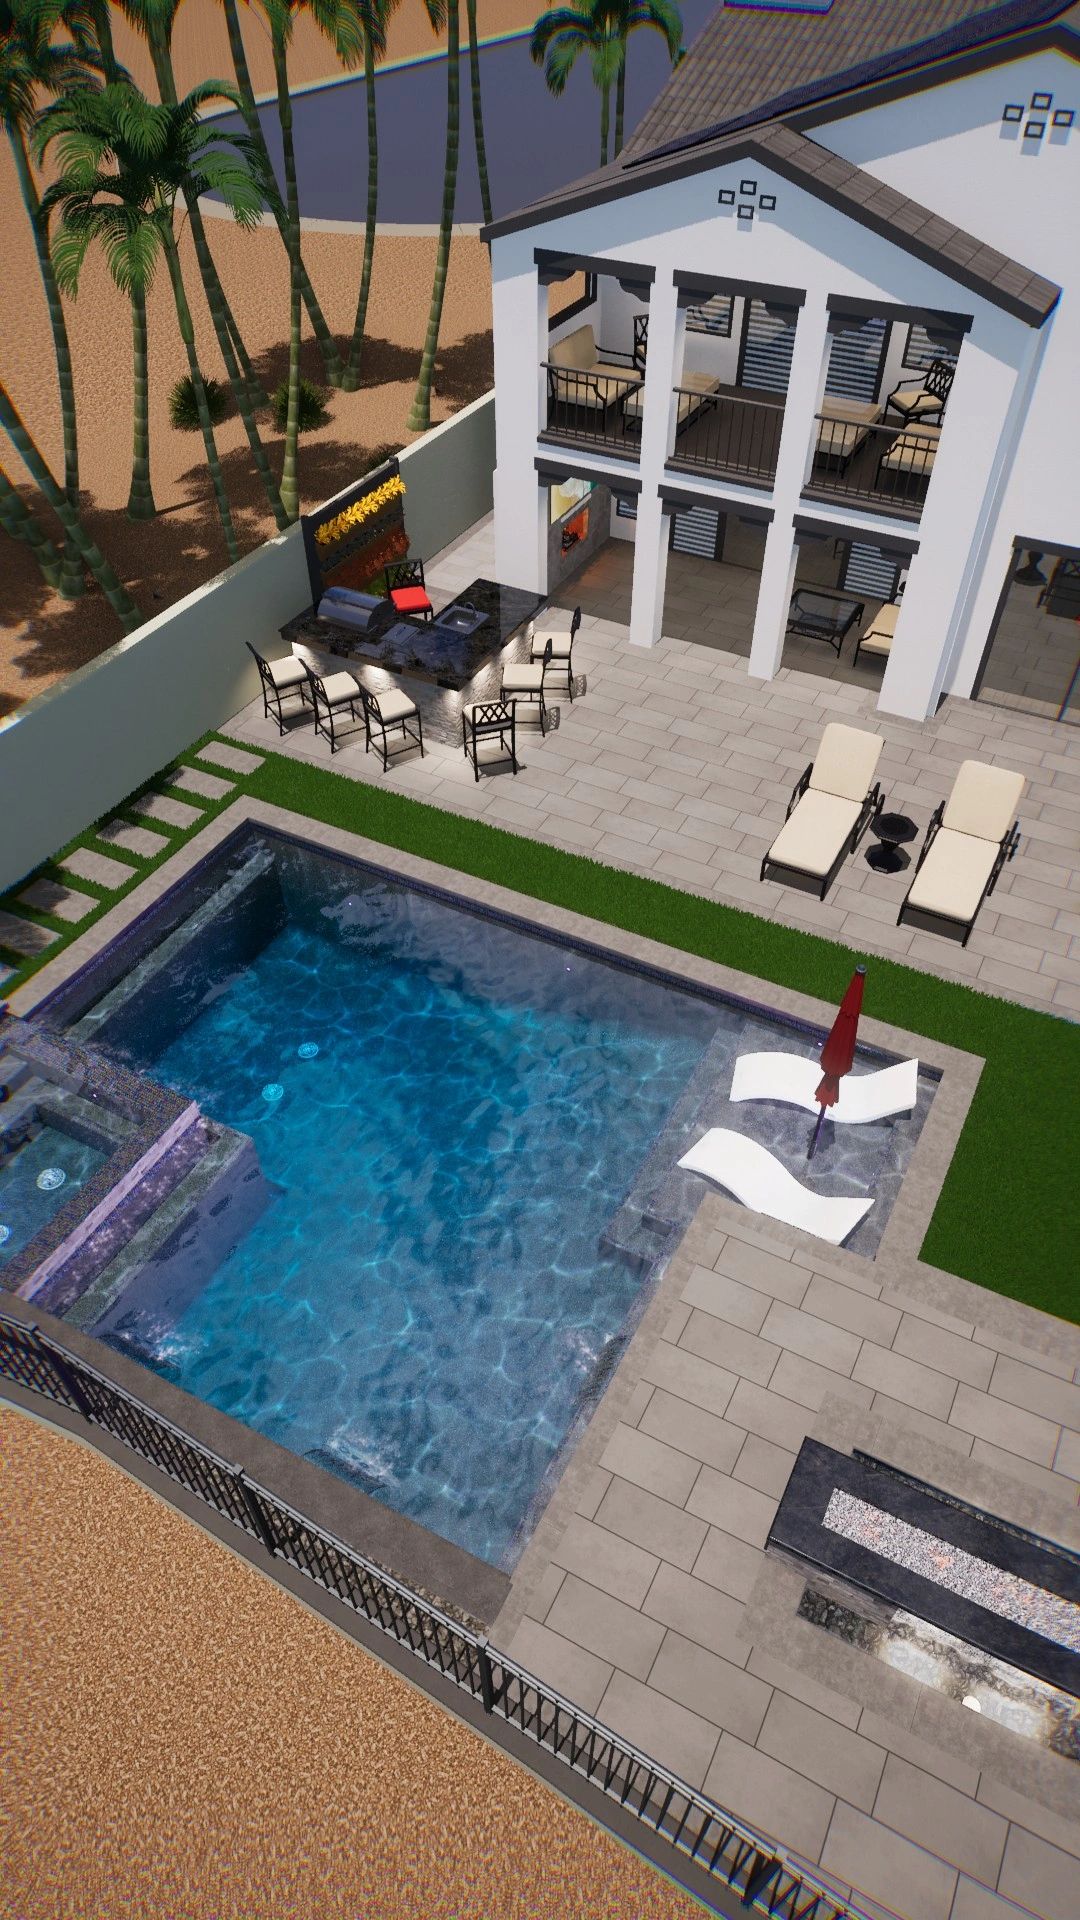 This back yard includes a swimming pool, porcelain paver deck, and outdoor kitchen.